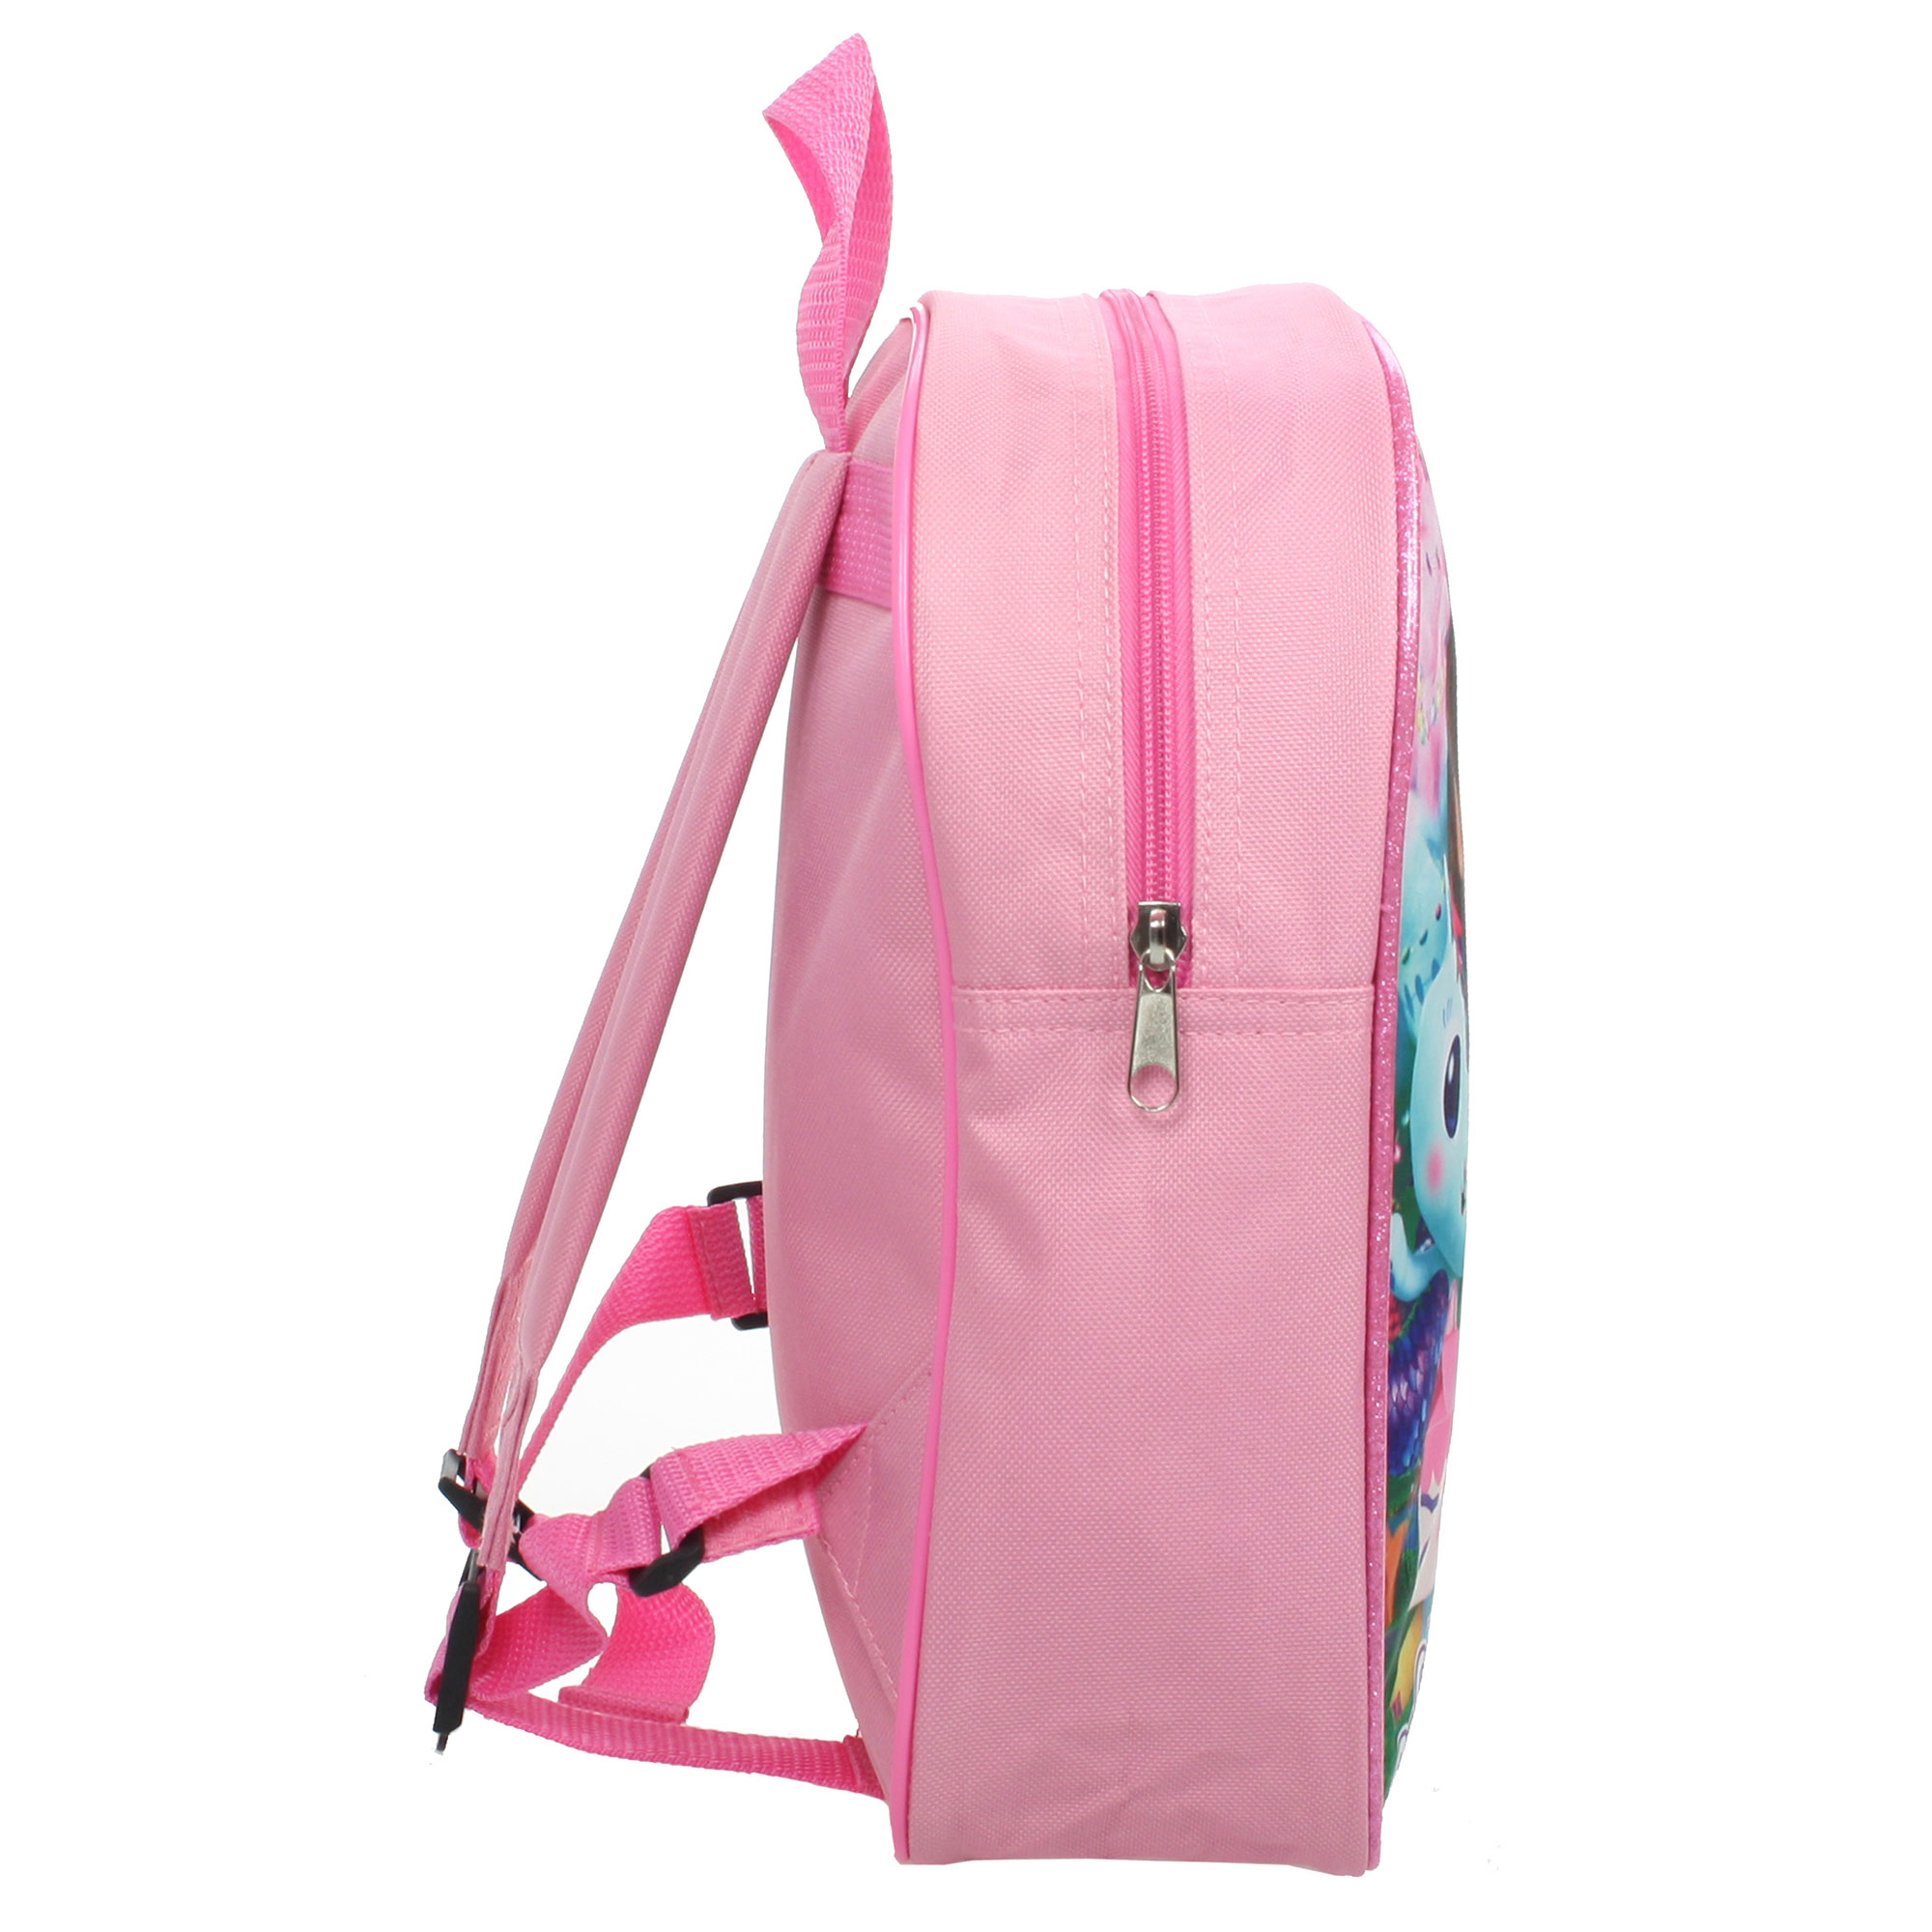 Buy Gabby's Dollhouse Backpack for GBP 9.99 | Card Factory UK